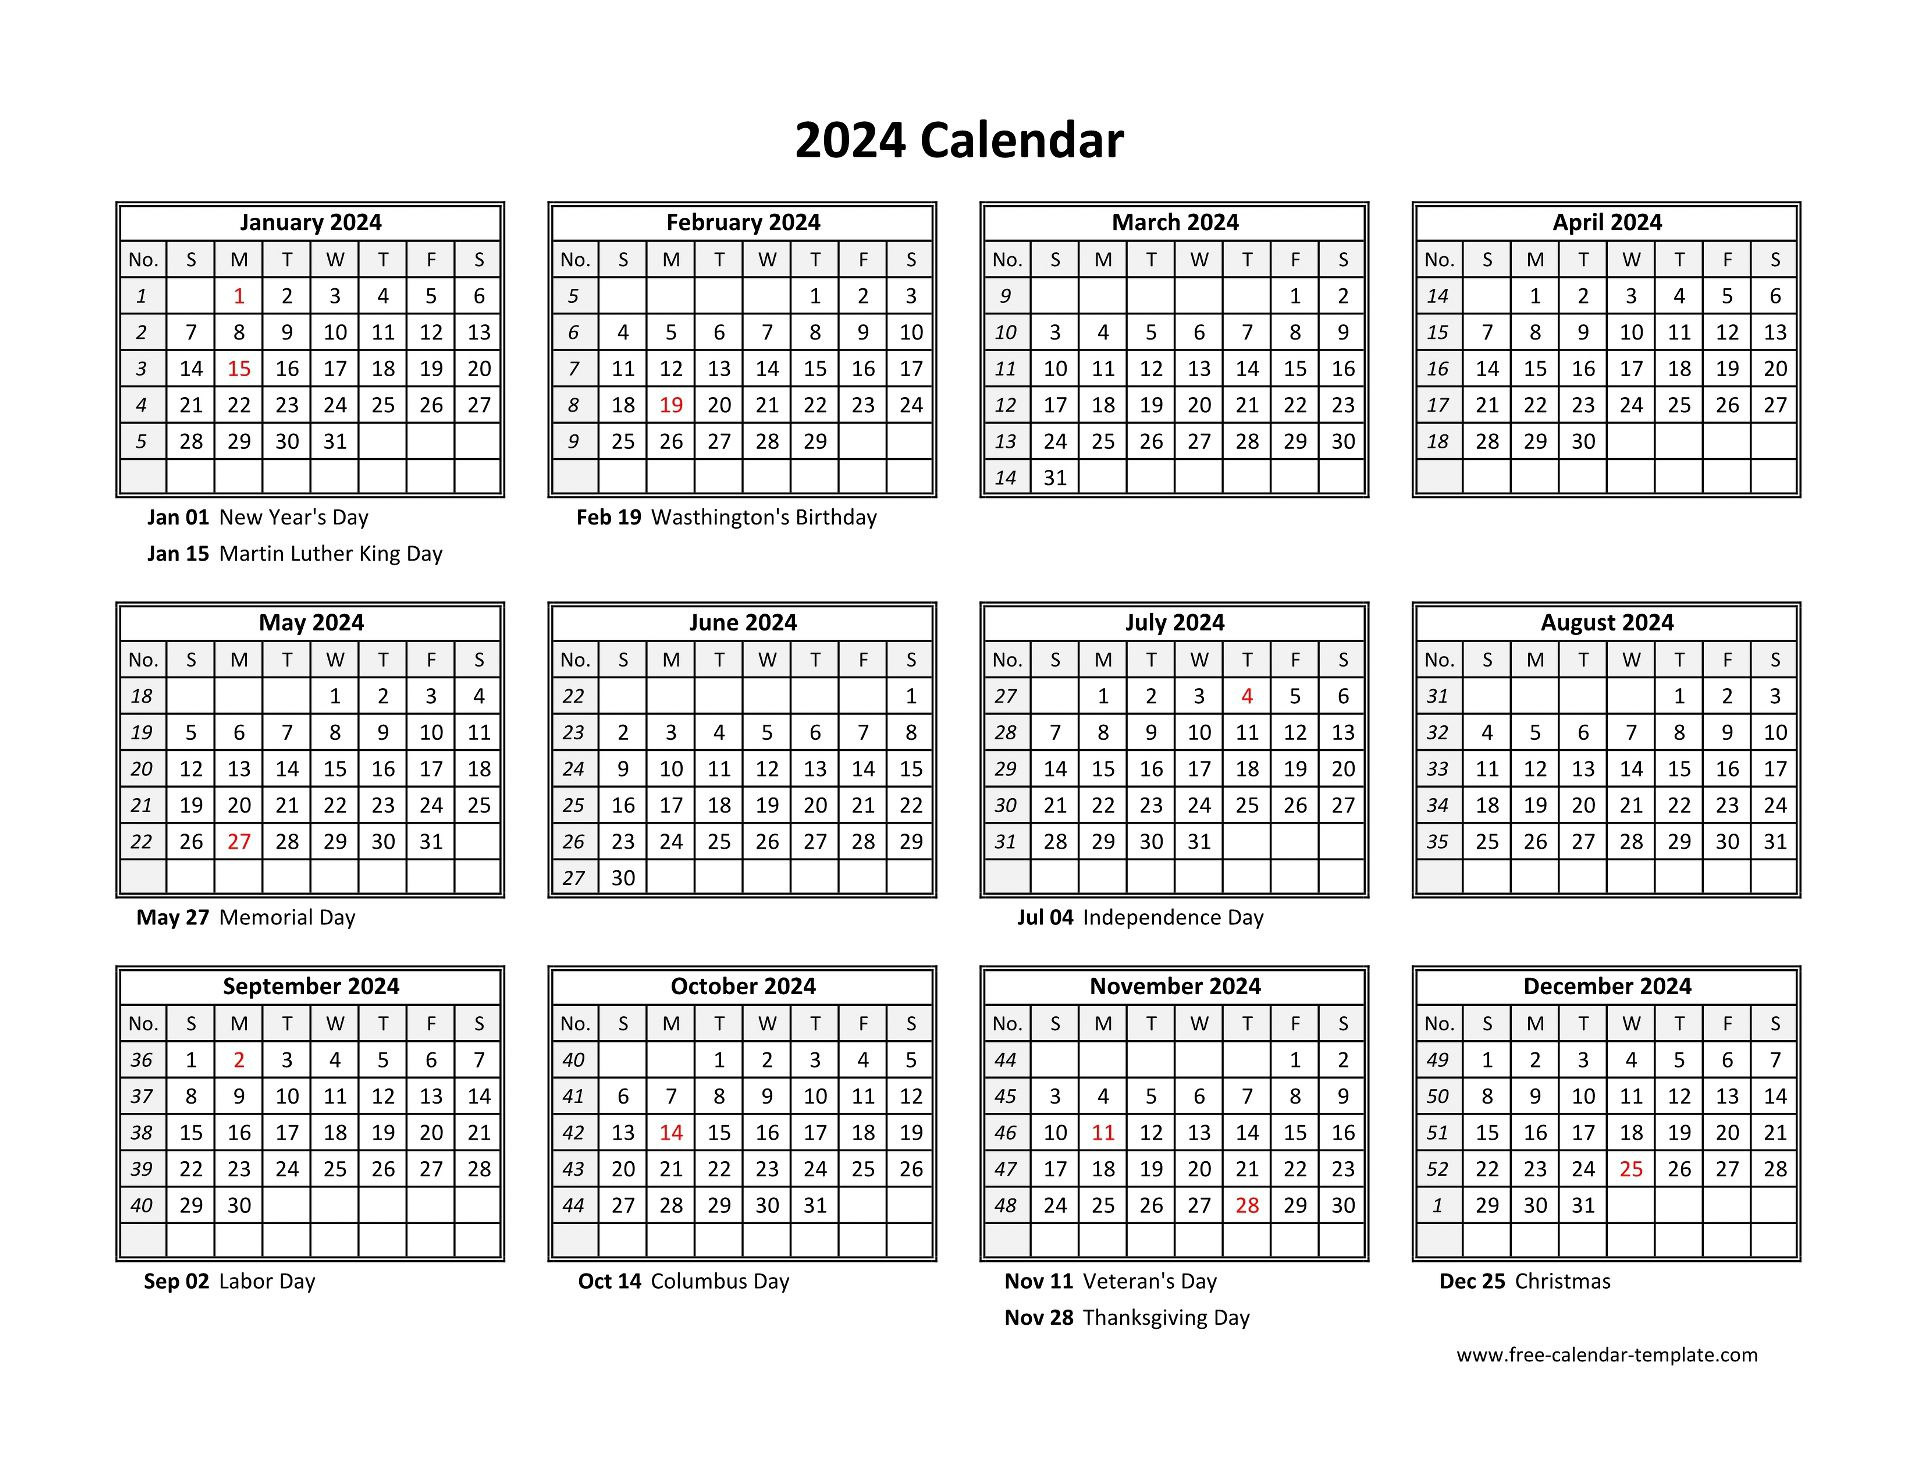 Yearly Calendar 2024 Printable With Federal Holidays | Free | Printable Calendar 2024 With Federal Holidays